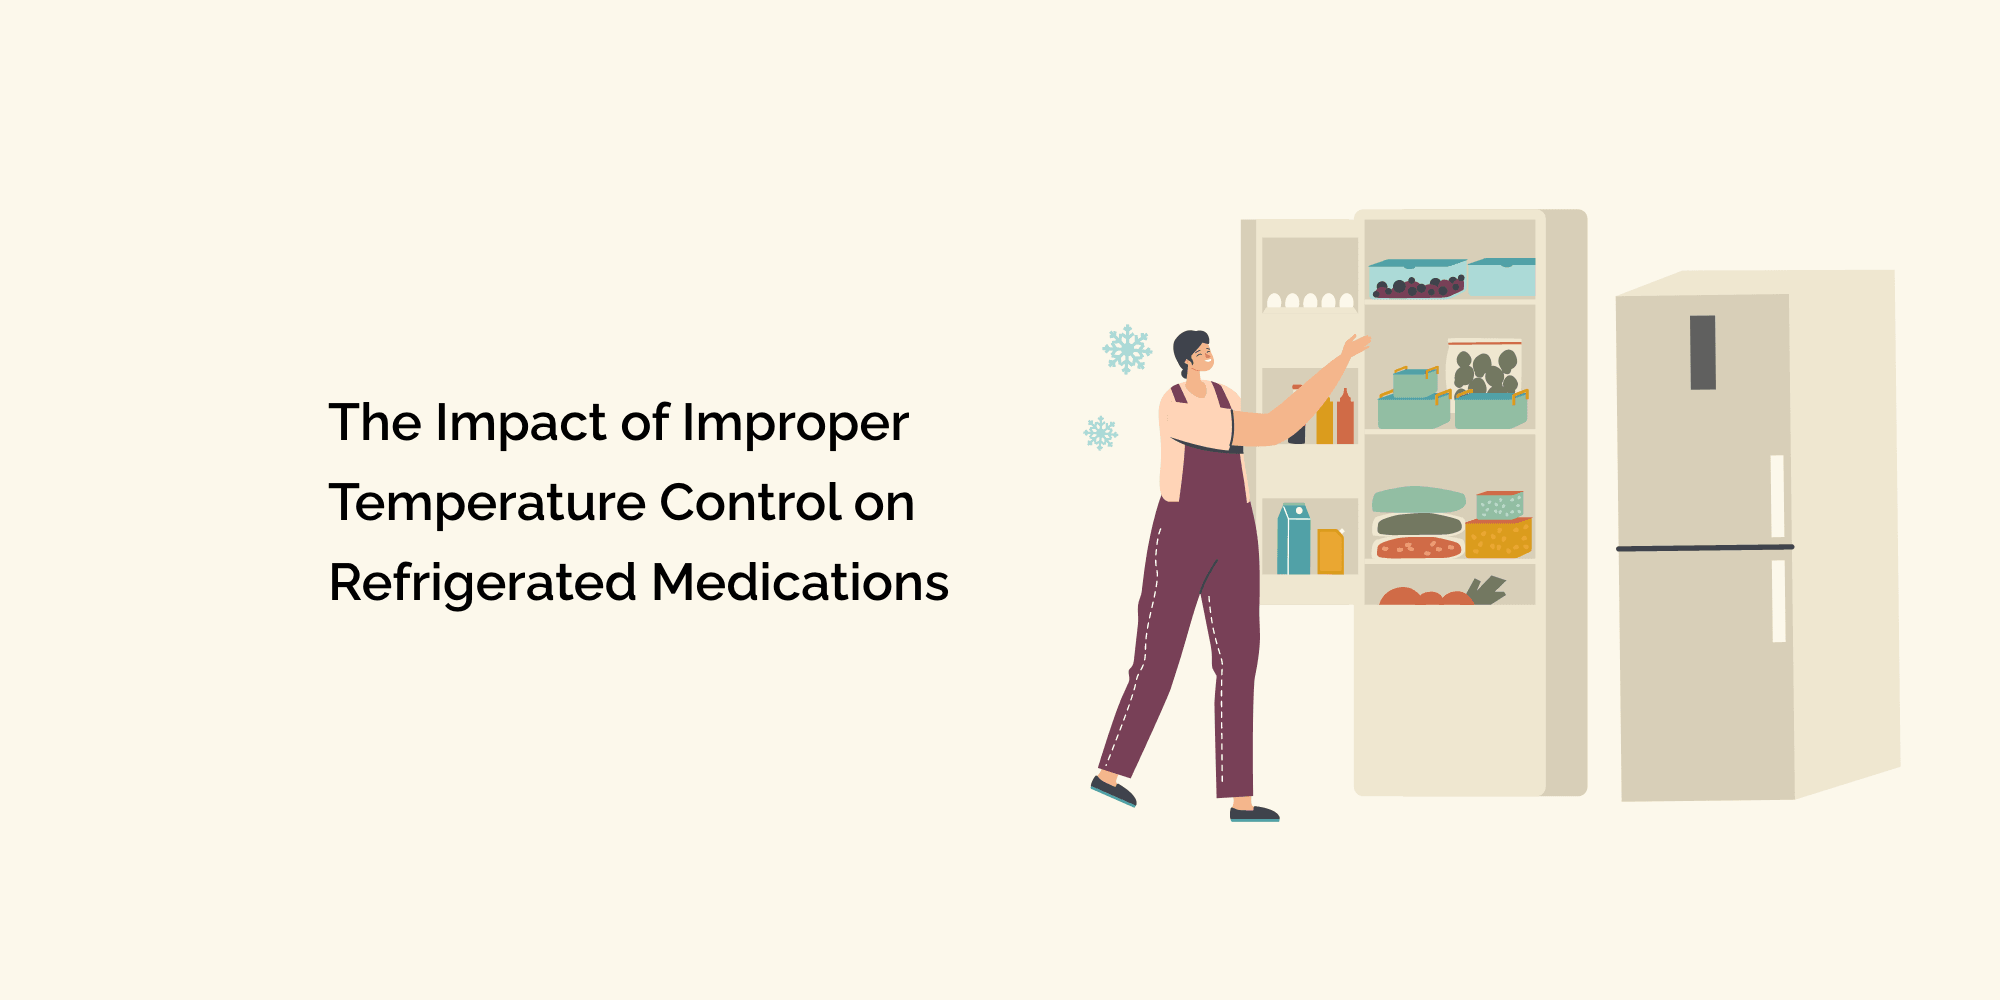 The Impact of Improper Temperature Control on Refrigerated Medications